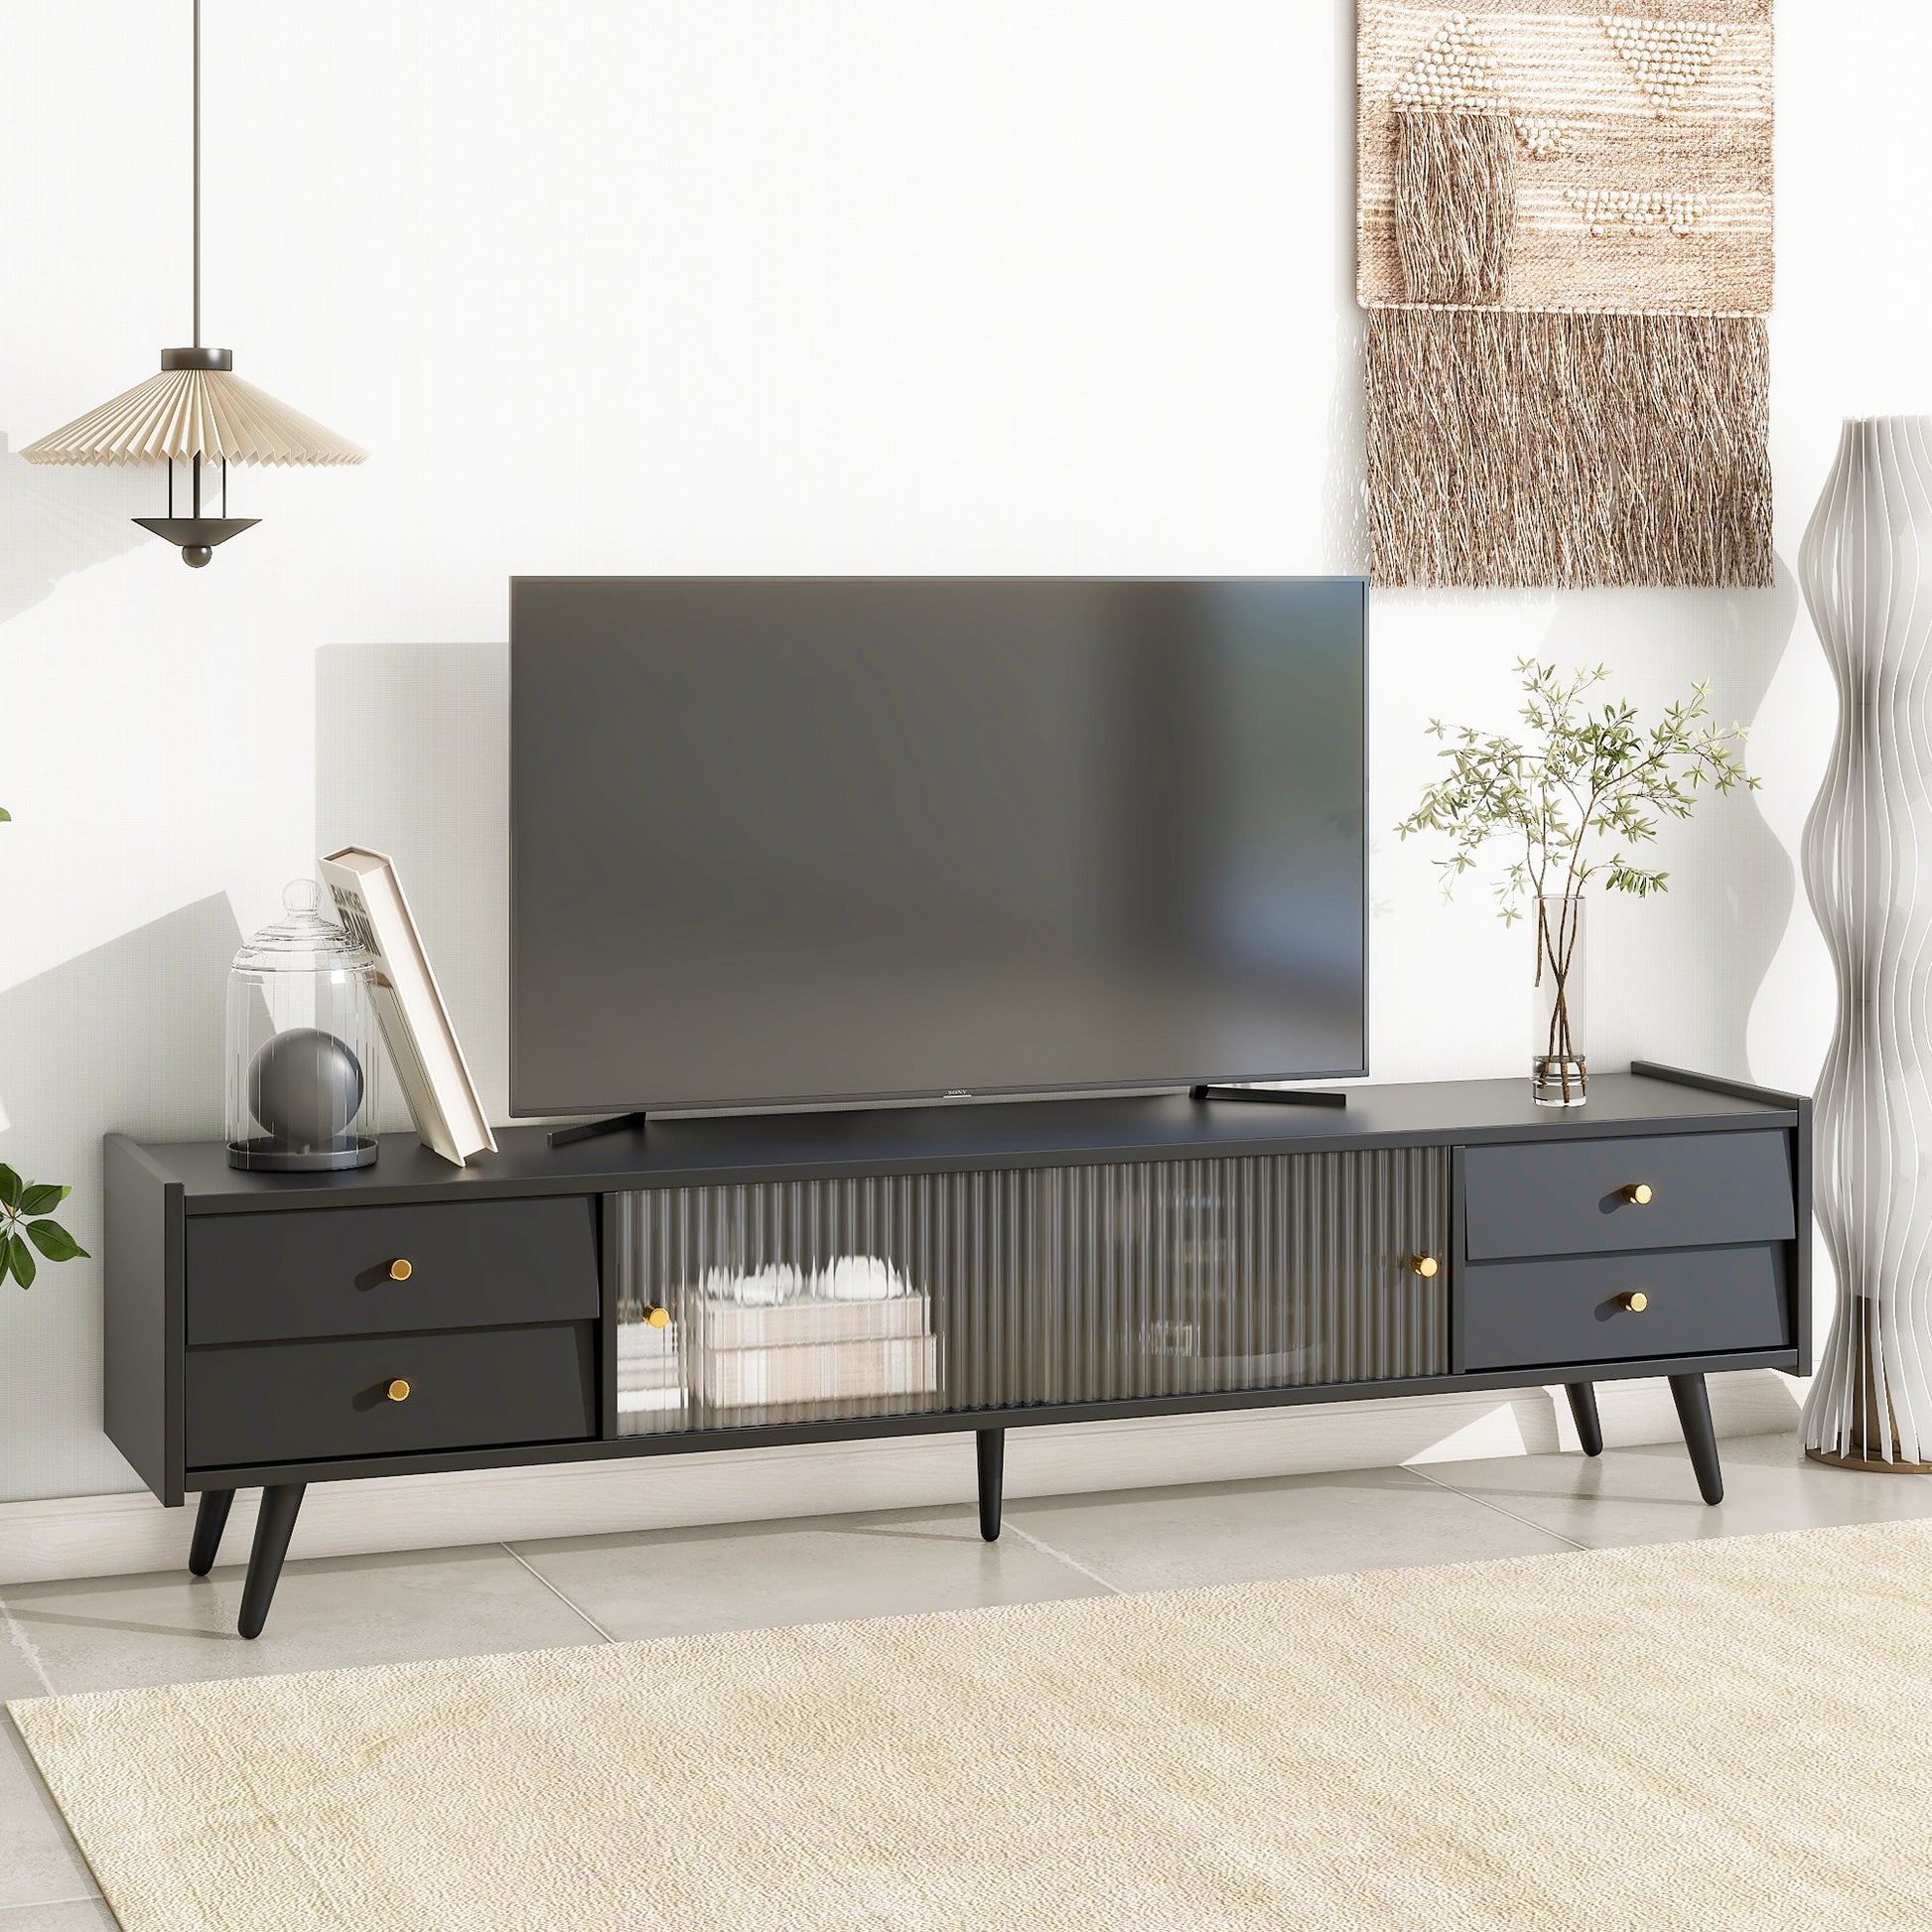 ON-TREND Contemporary TV Stand with Sliding Fluted Glass Doors, Slanted Drawers Media Console for TVs Up to 70", Chic Elegant TV Cabinet with Golden Metal Handles , Black - Enova Luxe Home Store